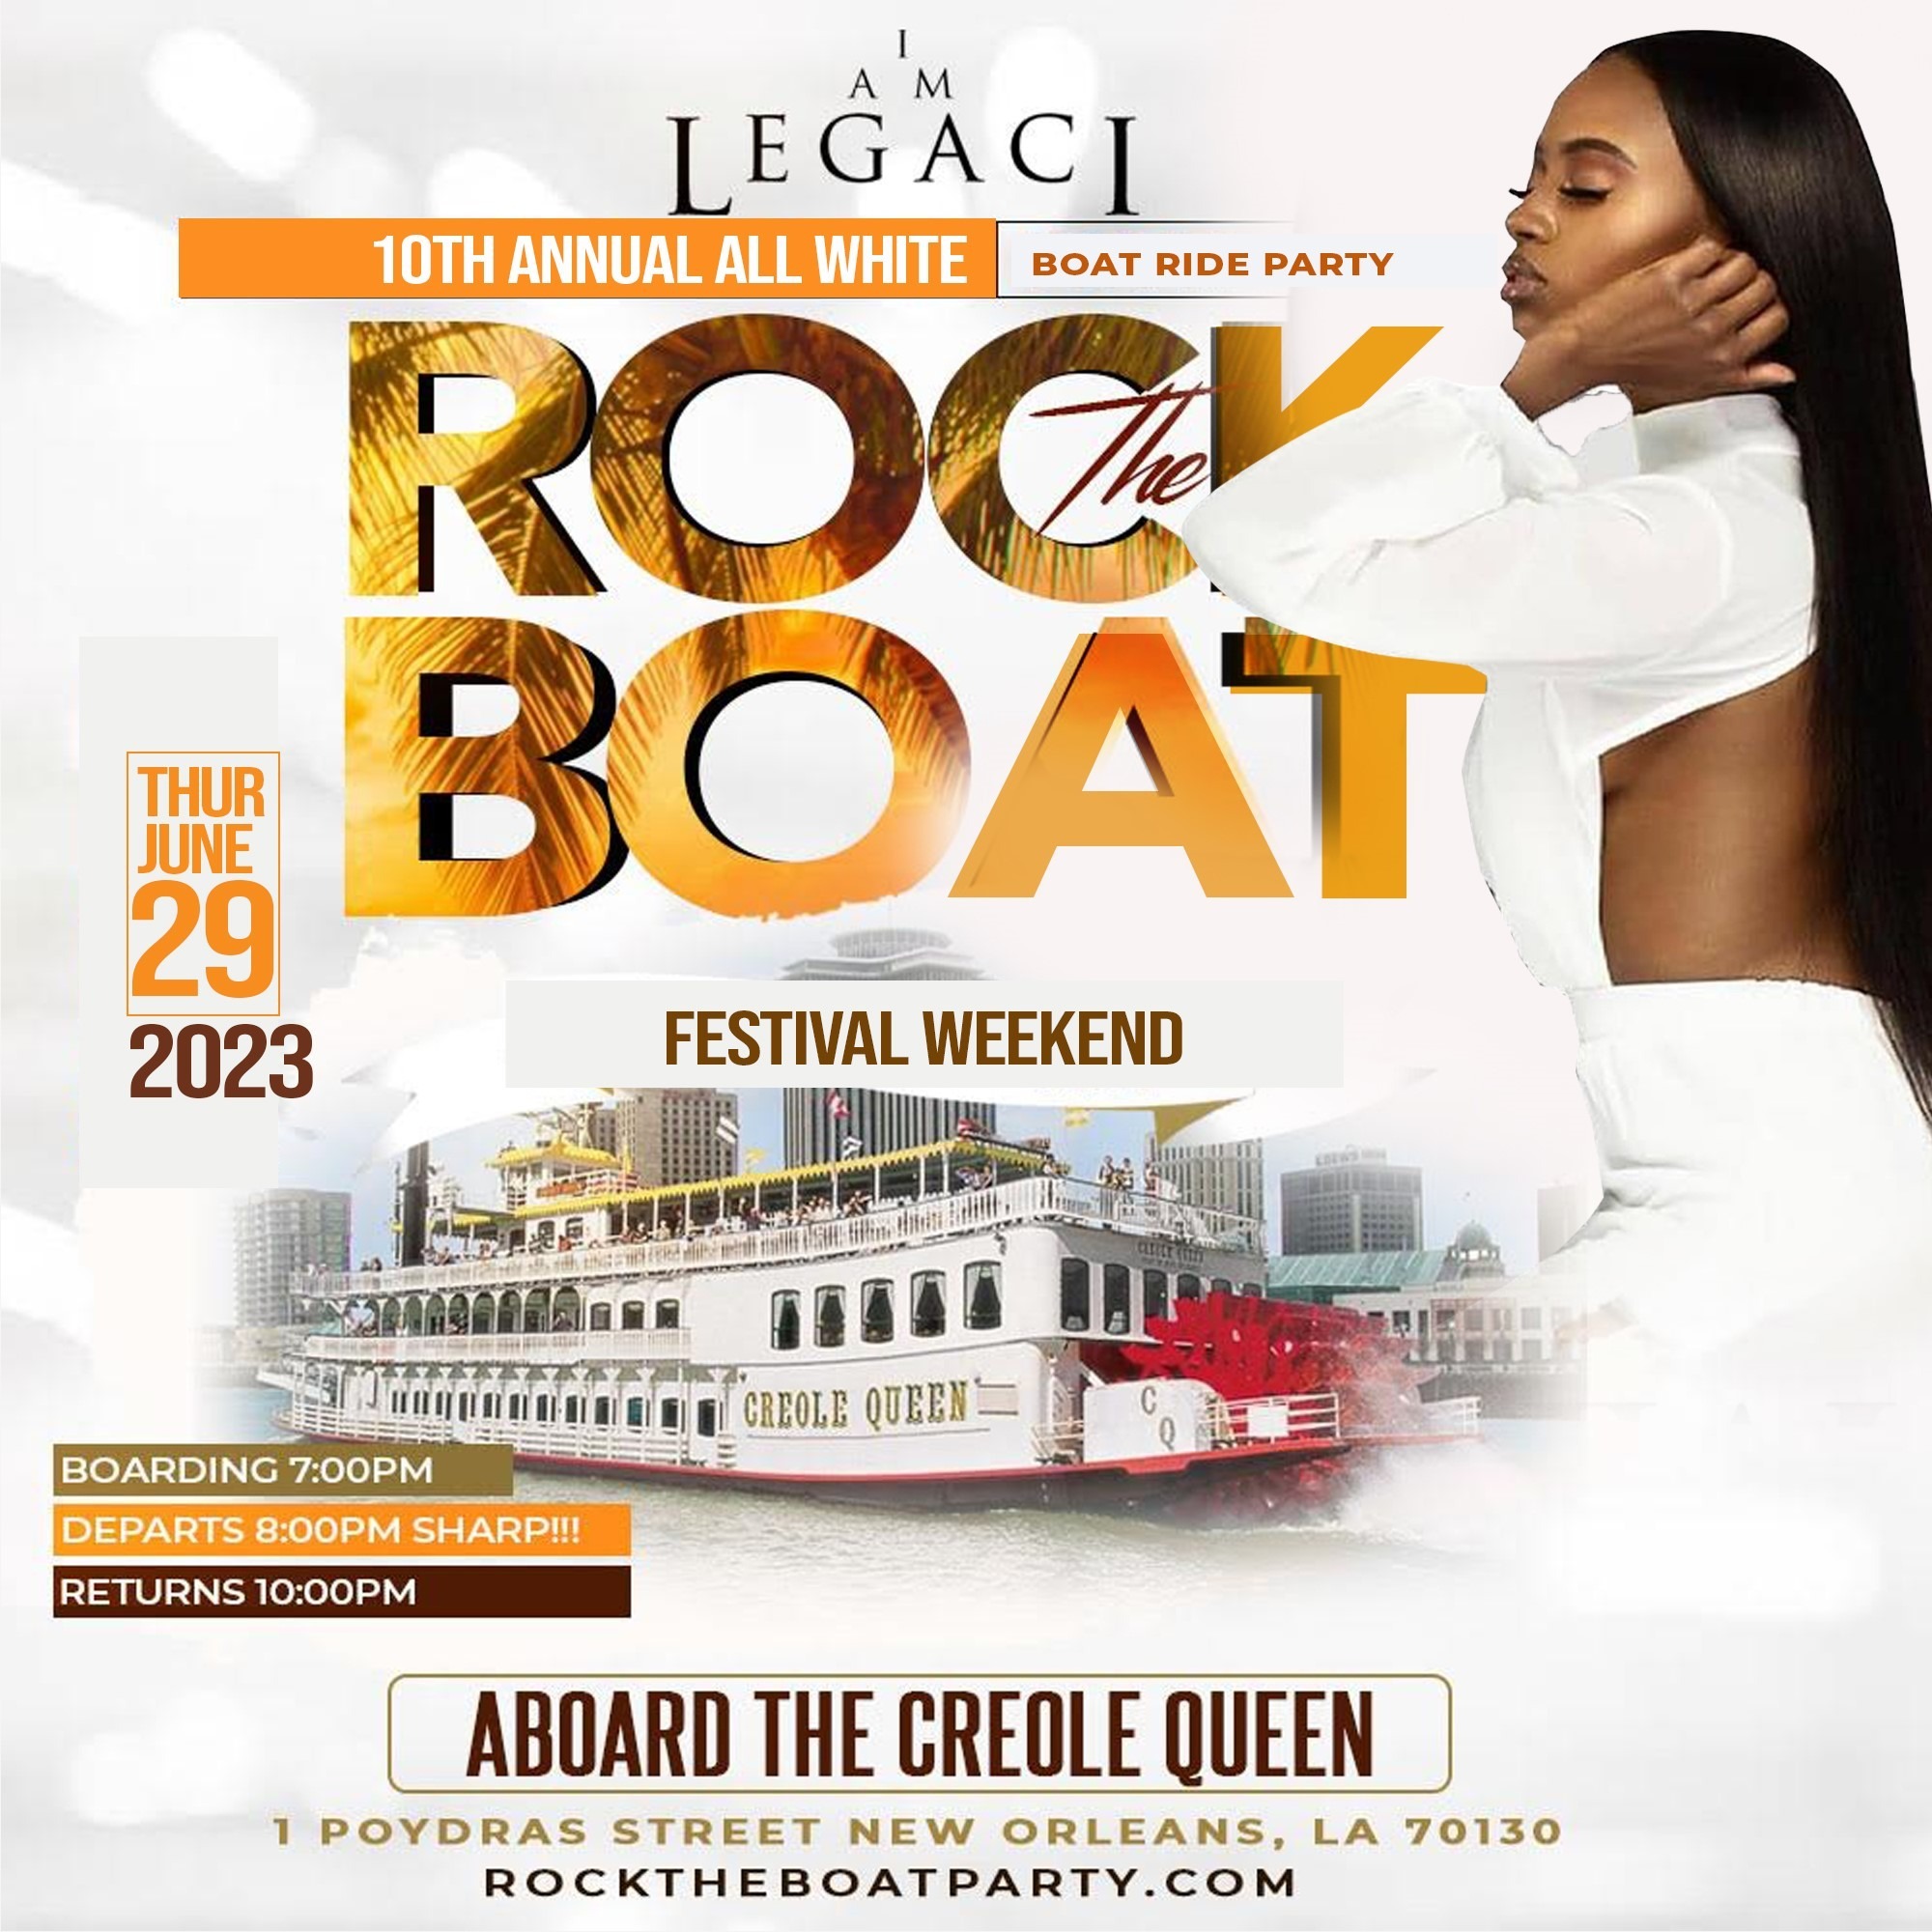 ROCK THE BOAT 10th ANNUAL ALL WHITE BOAT RIDE PARTY FESTIVAL WEEKEND 2023